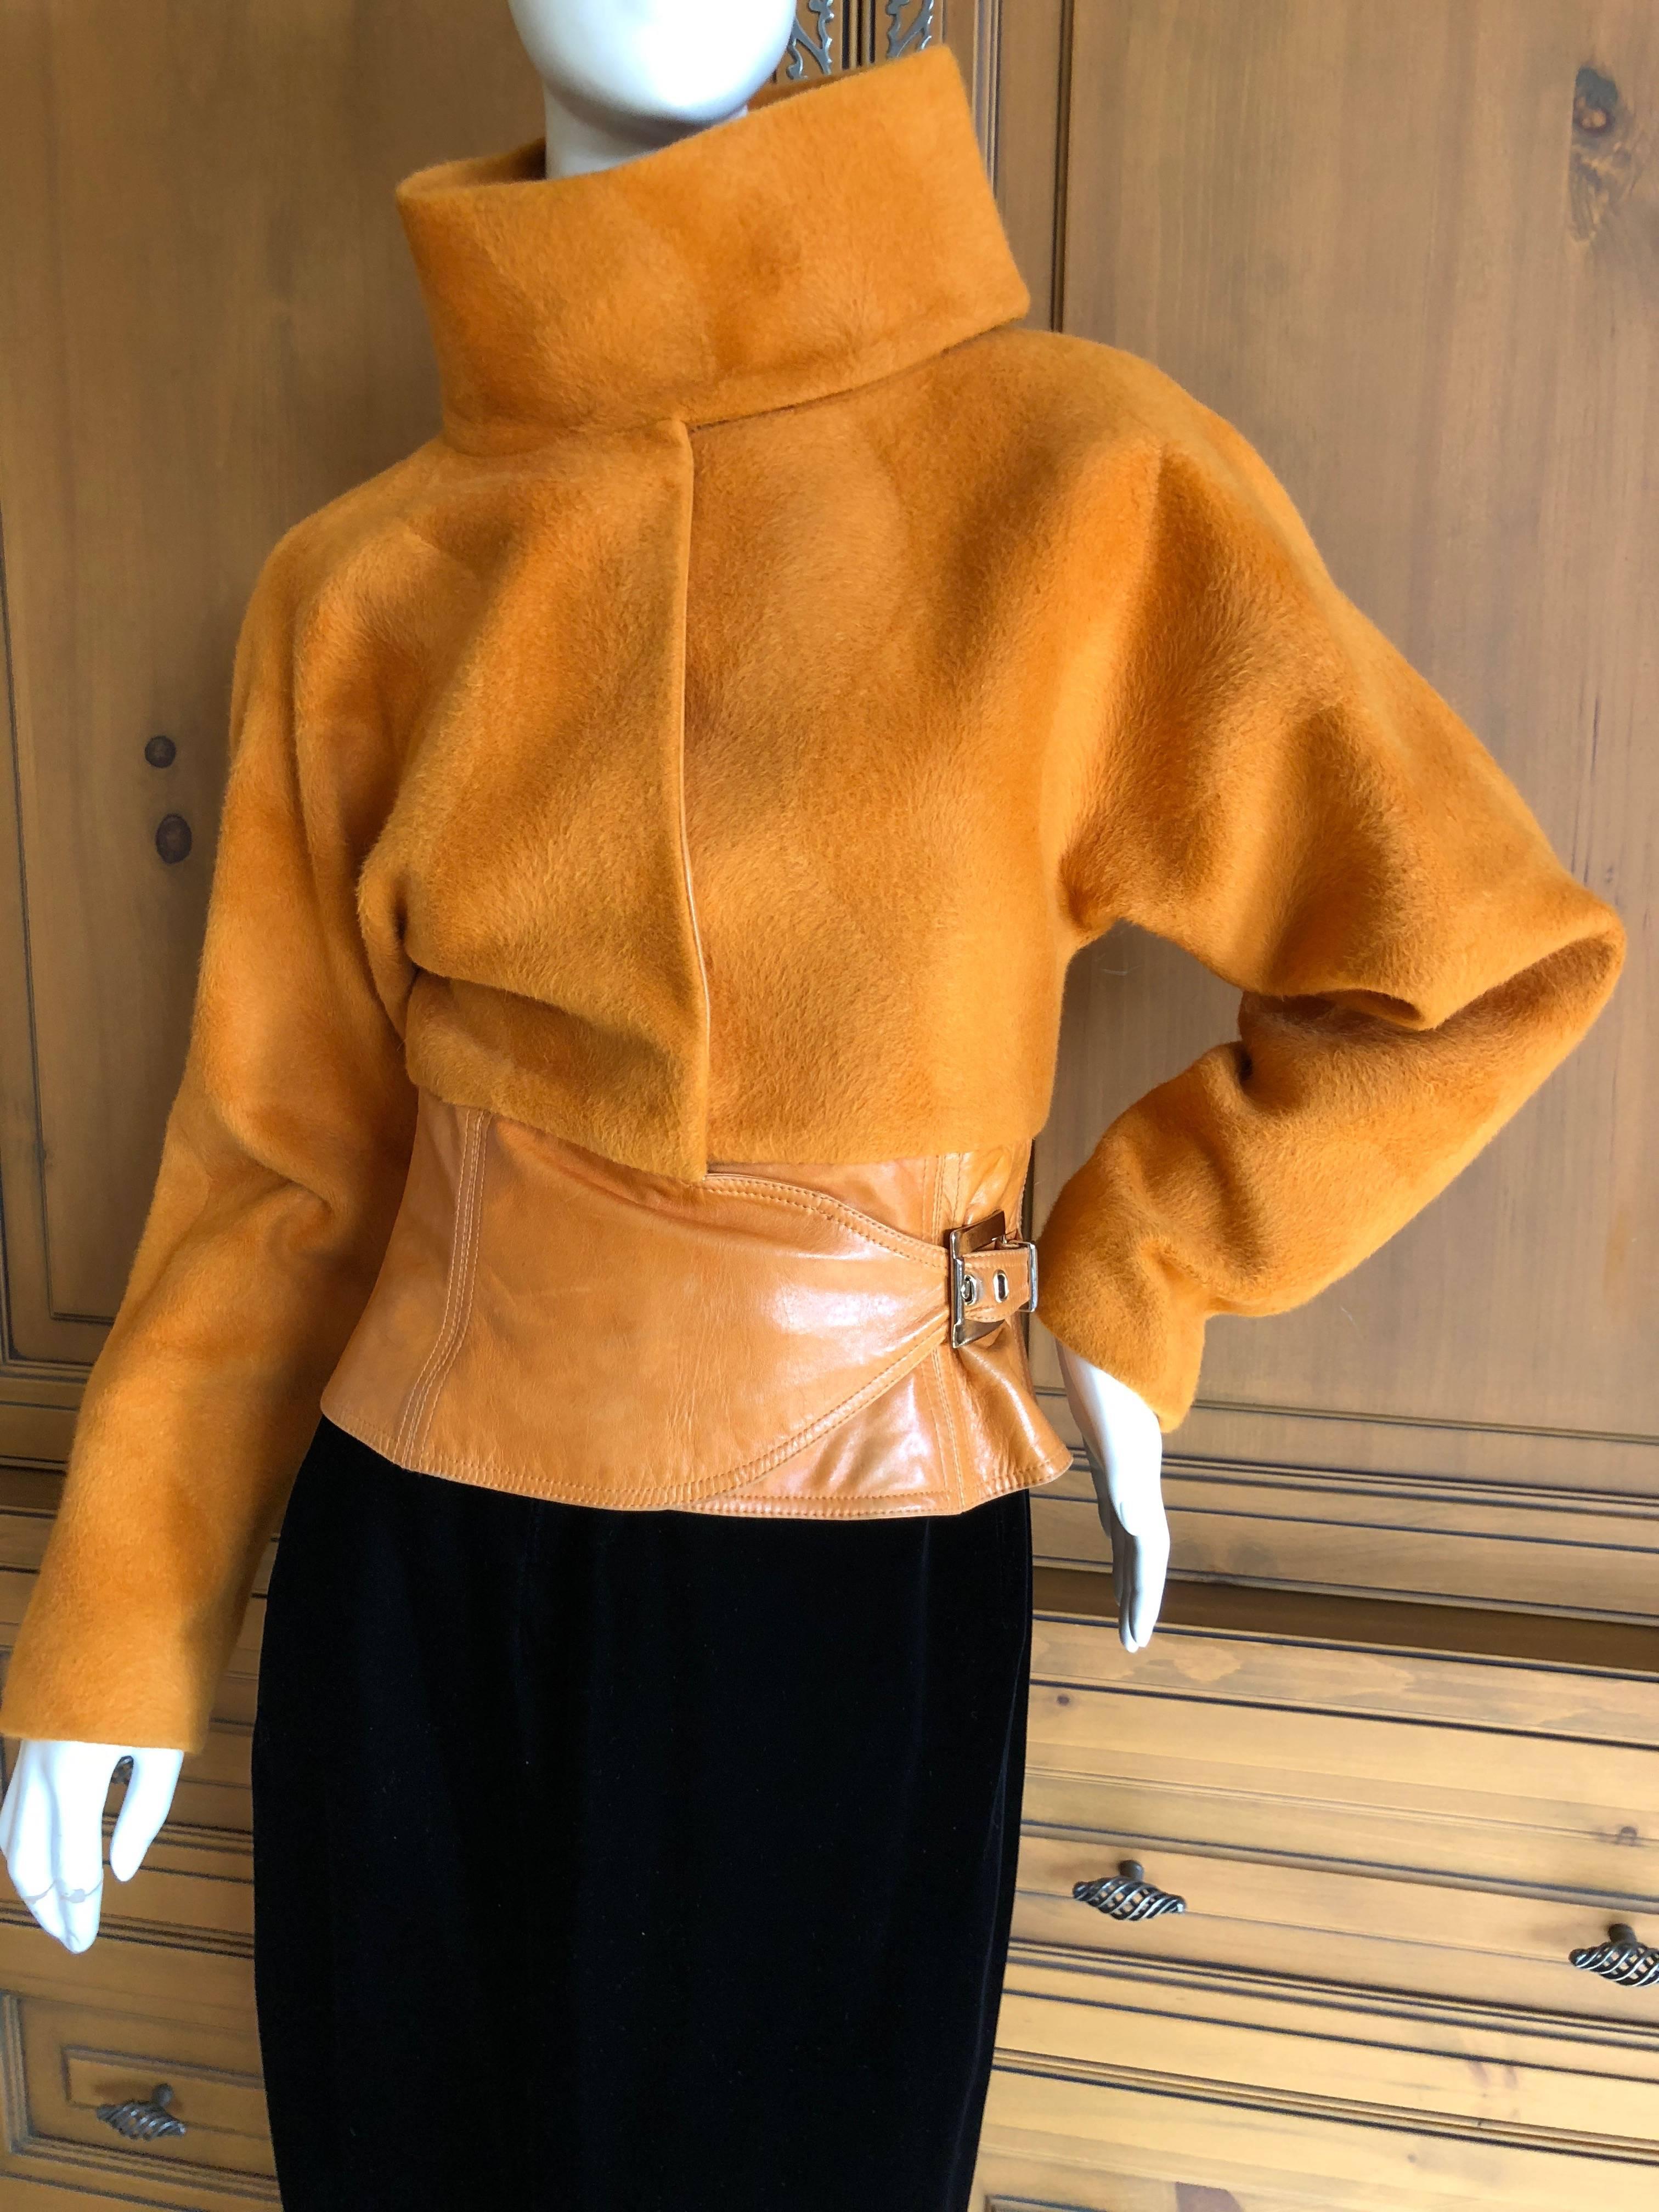 Gianni Versace Couture 1980's Luxurious Orange Wrap Jacket with Leather Trim For Sale 1